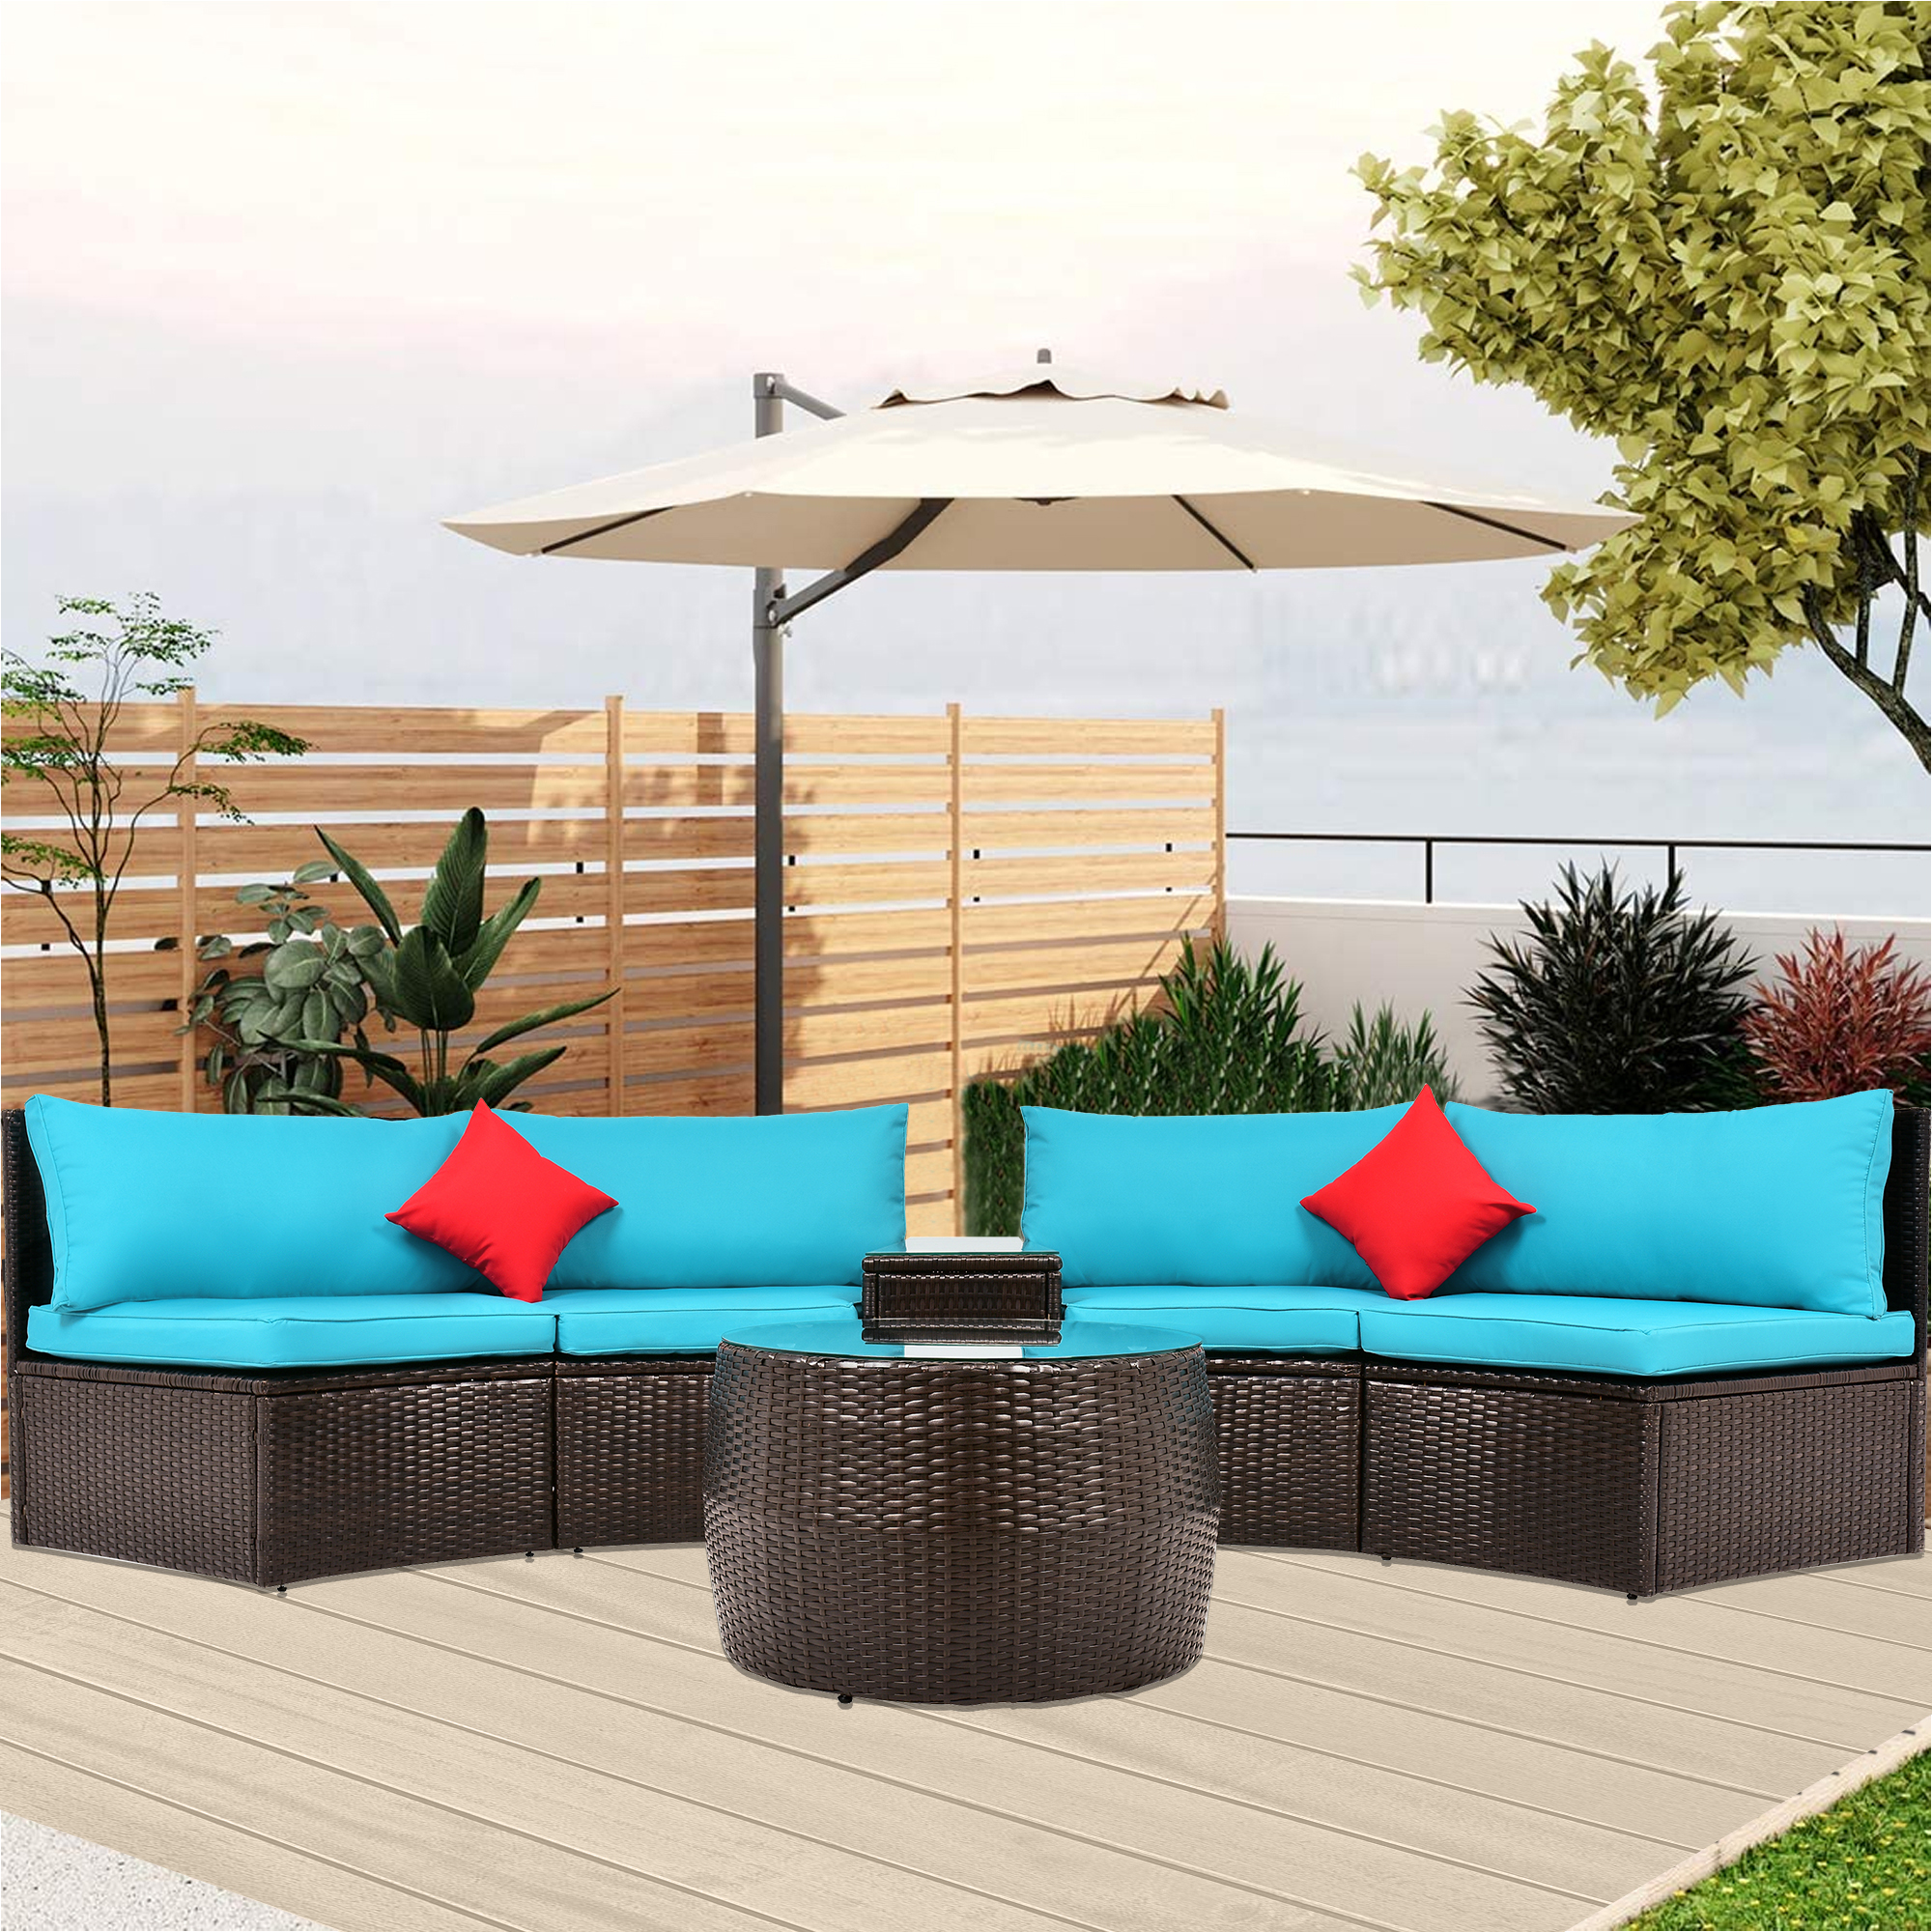 SEGMART 4-Piece Patio Furniture Sets, 2022 Wicker Patio Conversation Furniture Set with Two Pillowsm, Coffee Table and Seat Cushions, Outdoor Wicker Sofa Sets for Porch Poolside Backyard Garden, S1608 - image 1 of 9